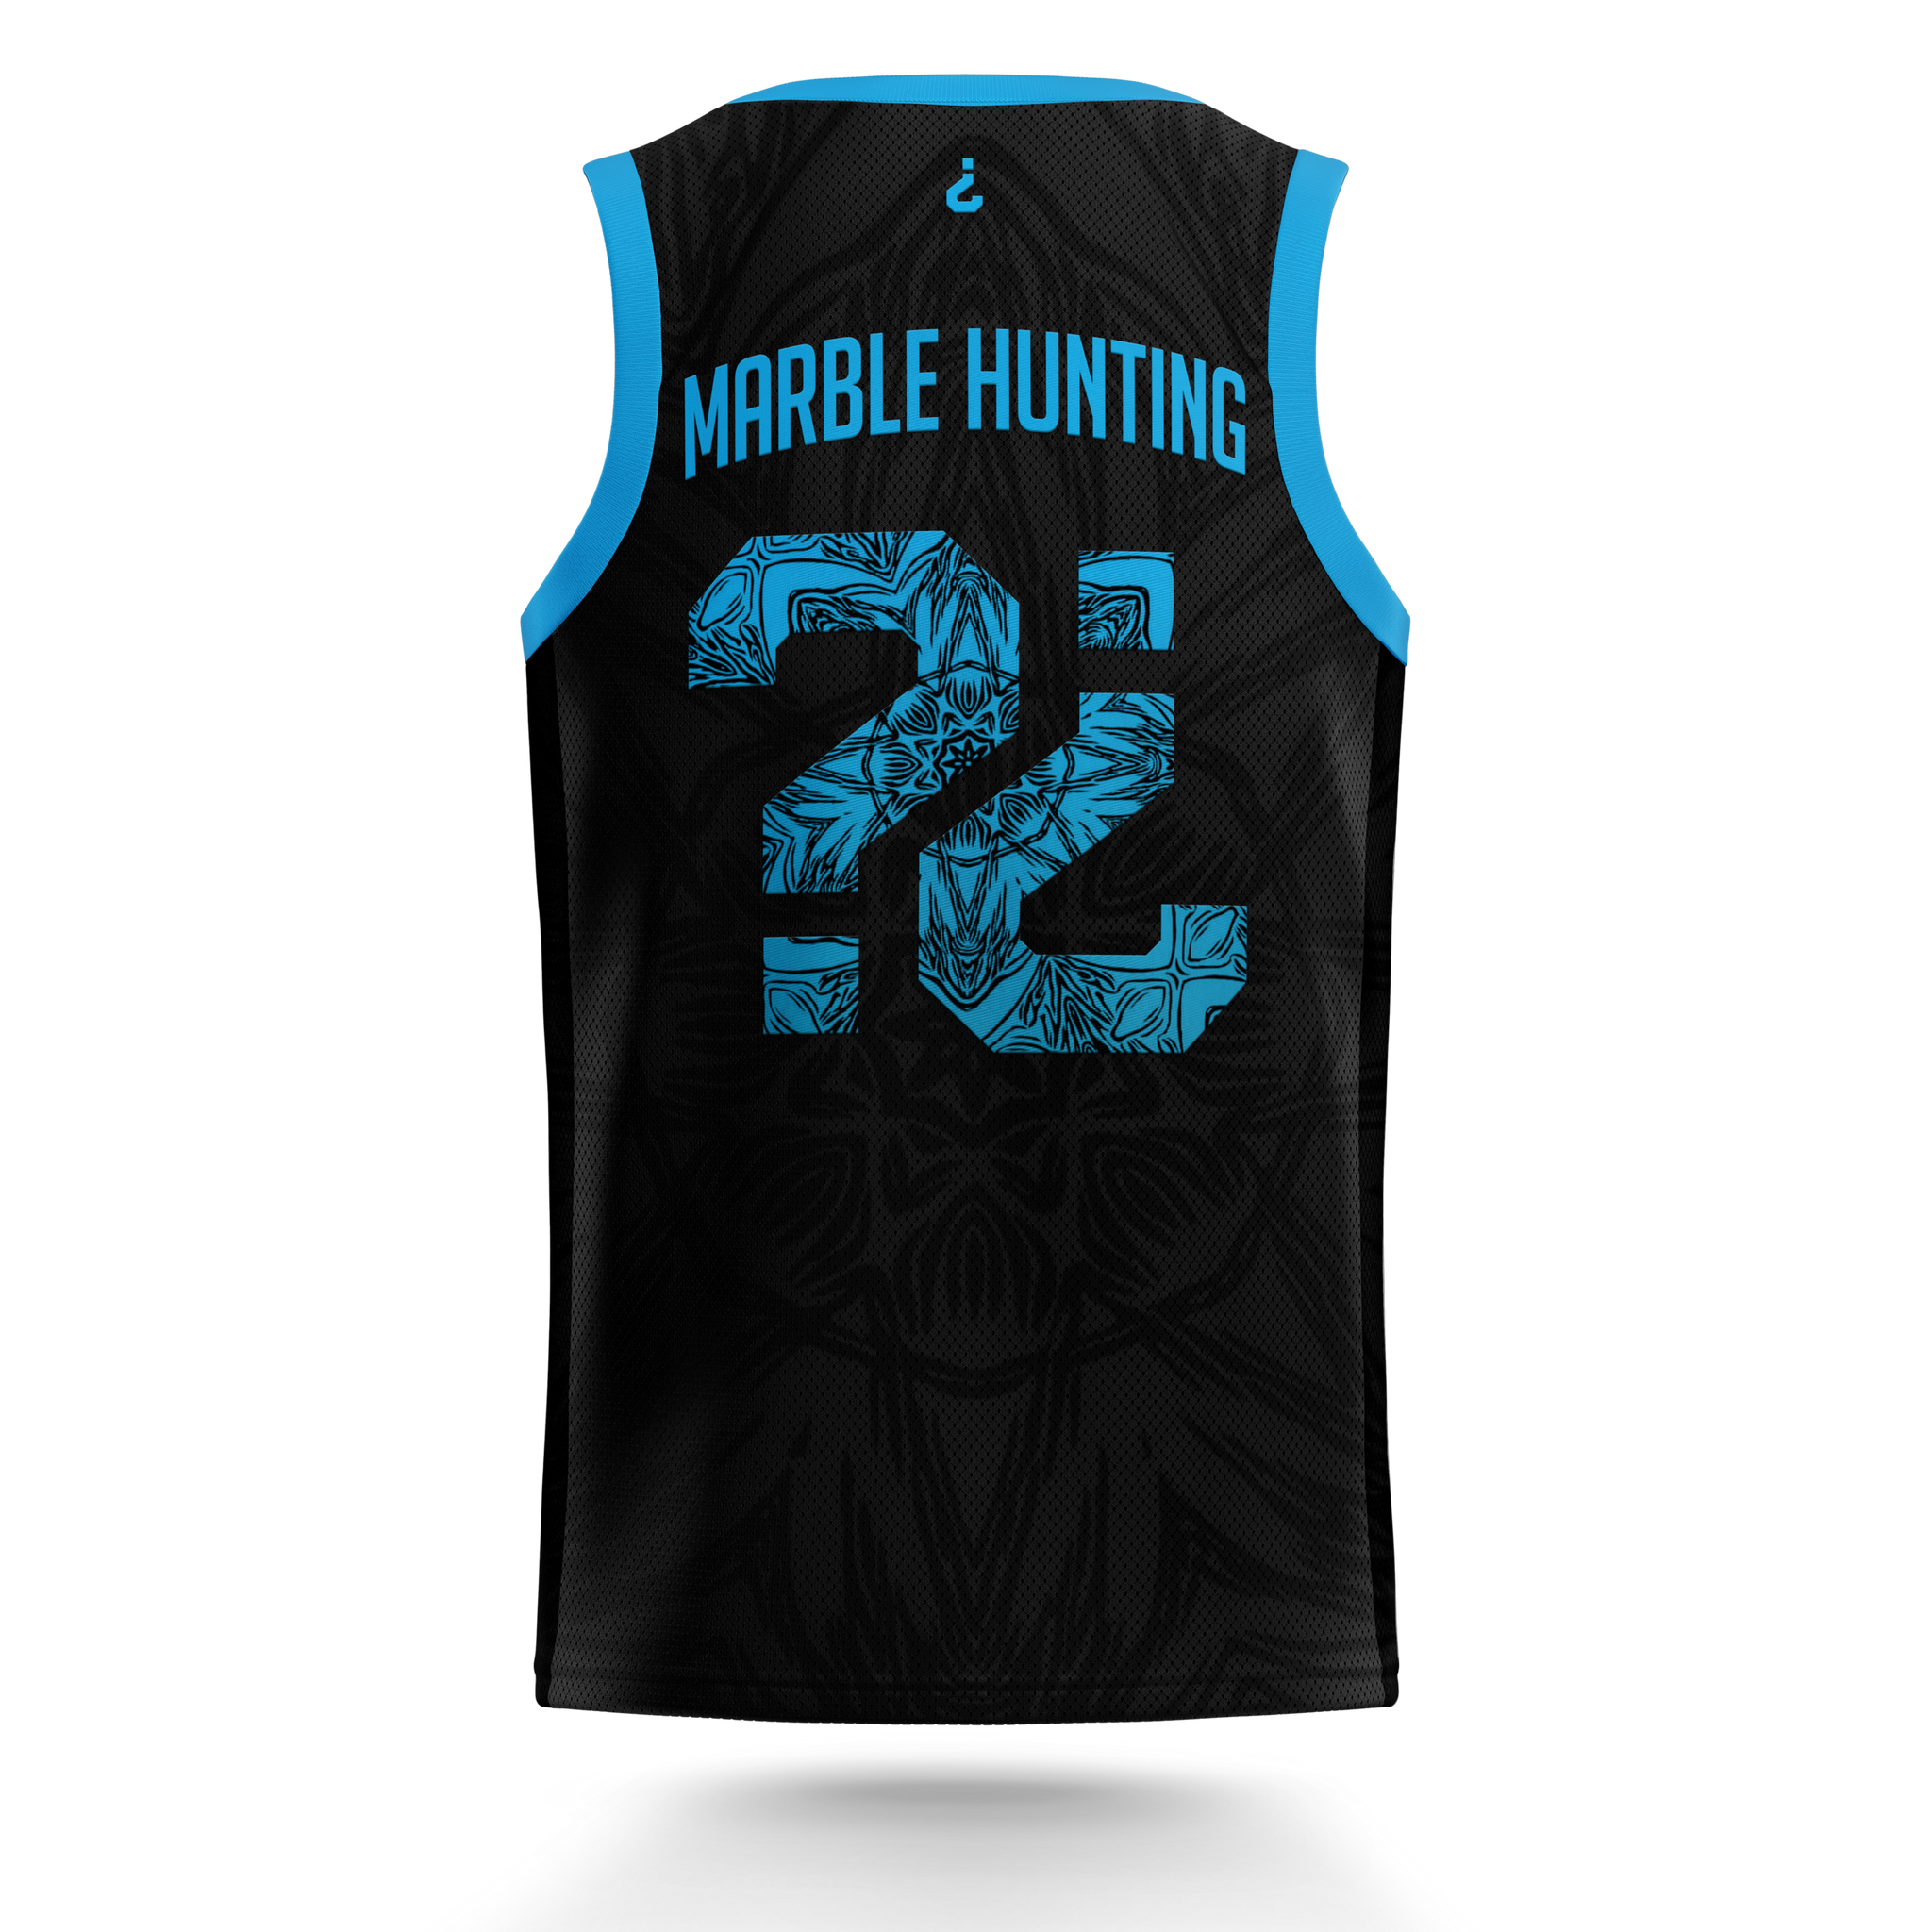 FULL SUBLIMATION BUZZ CITY NEW EDITION BASKETBALL JERSEY FREE